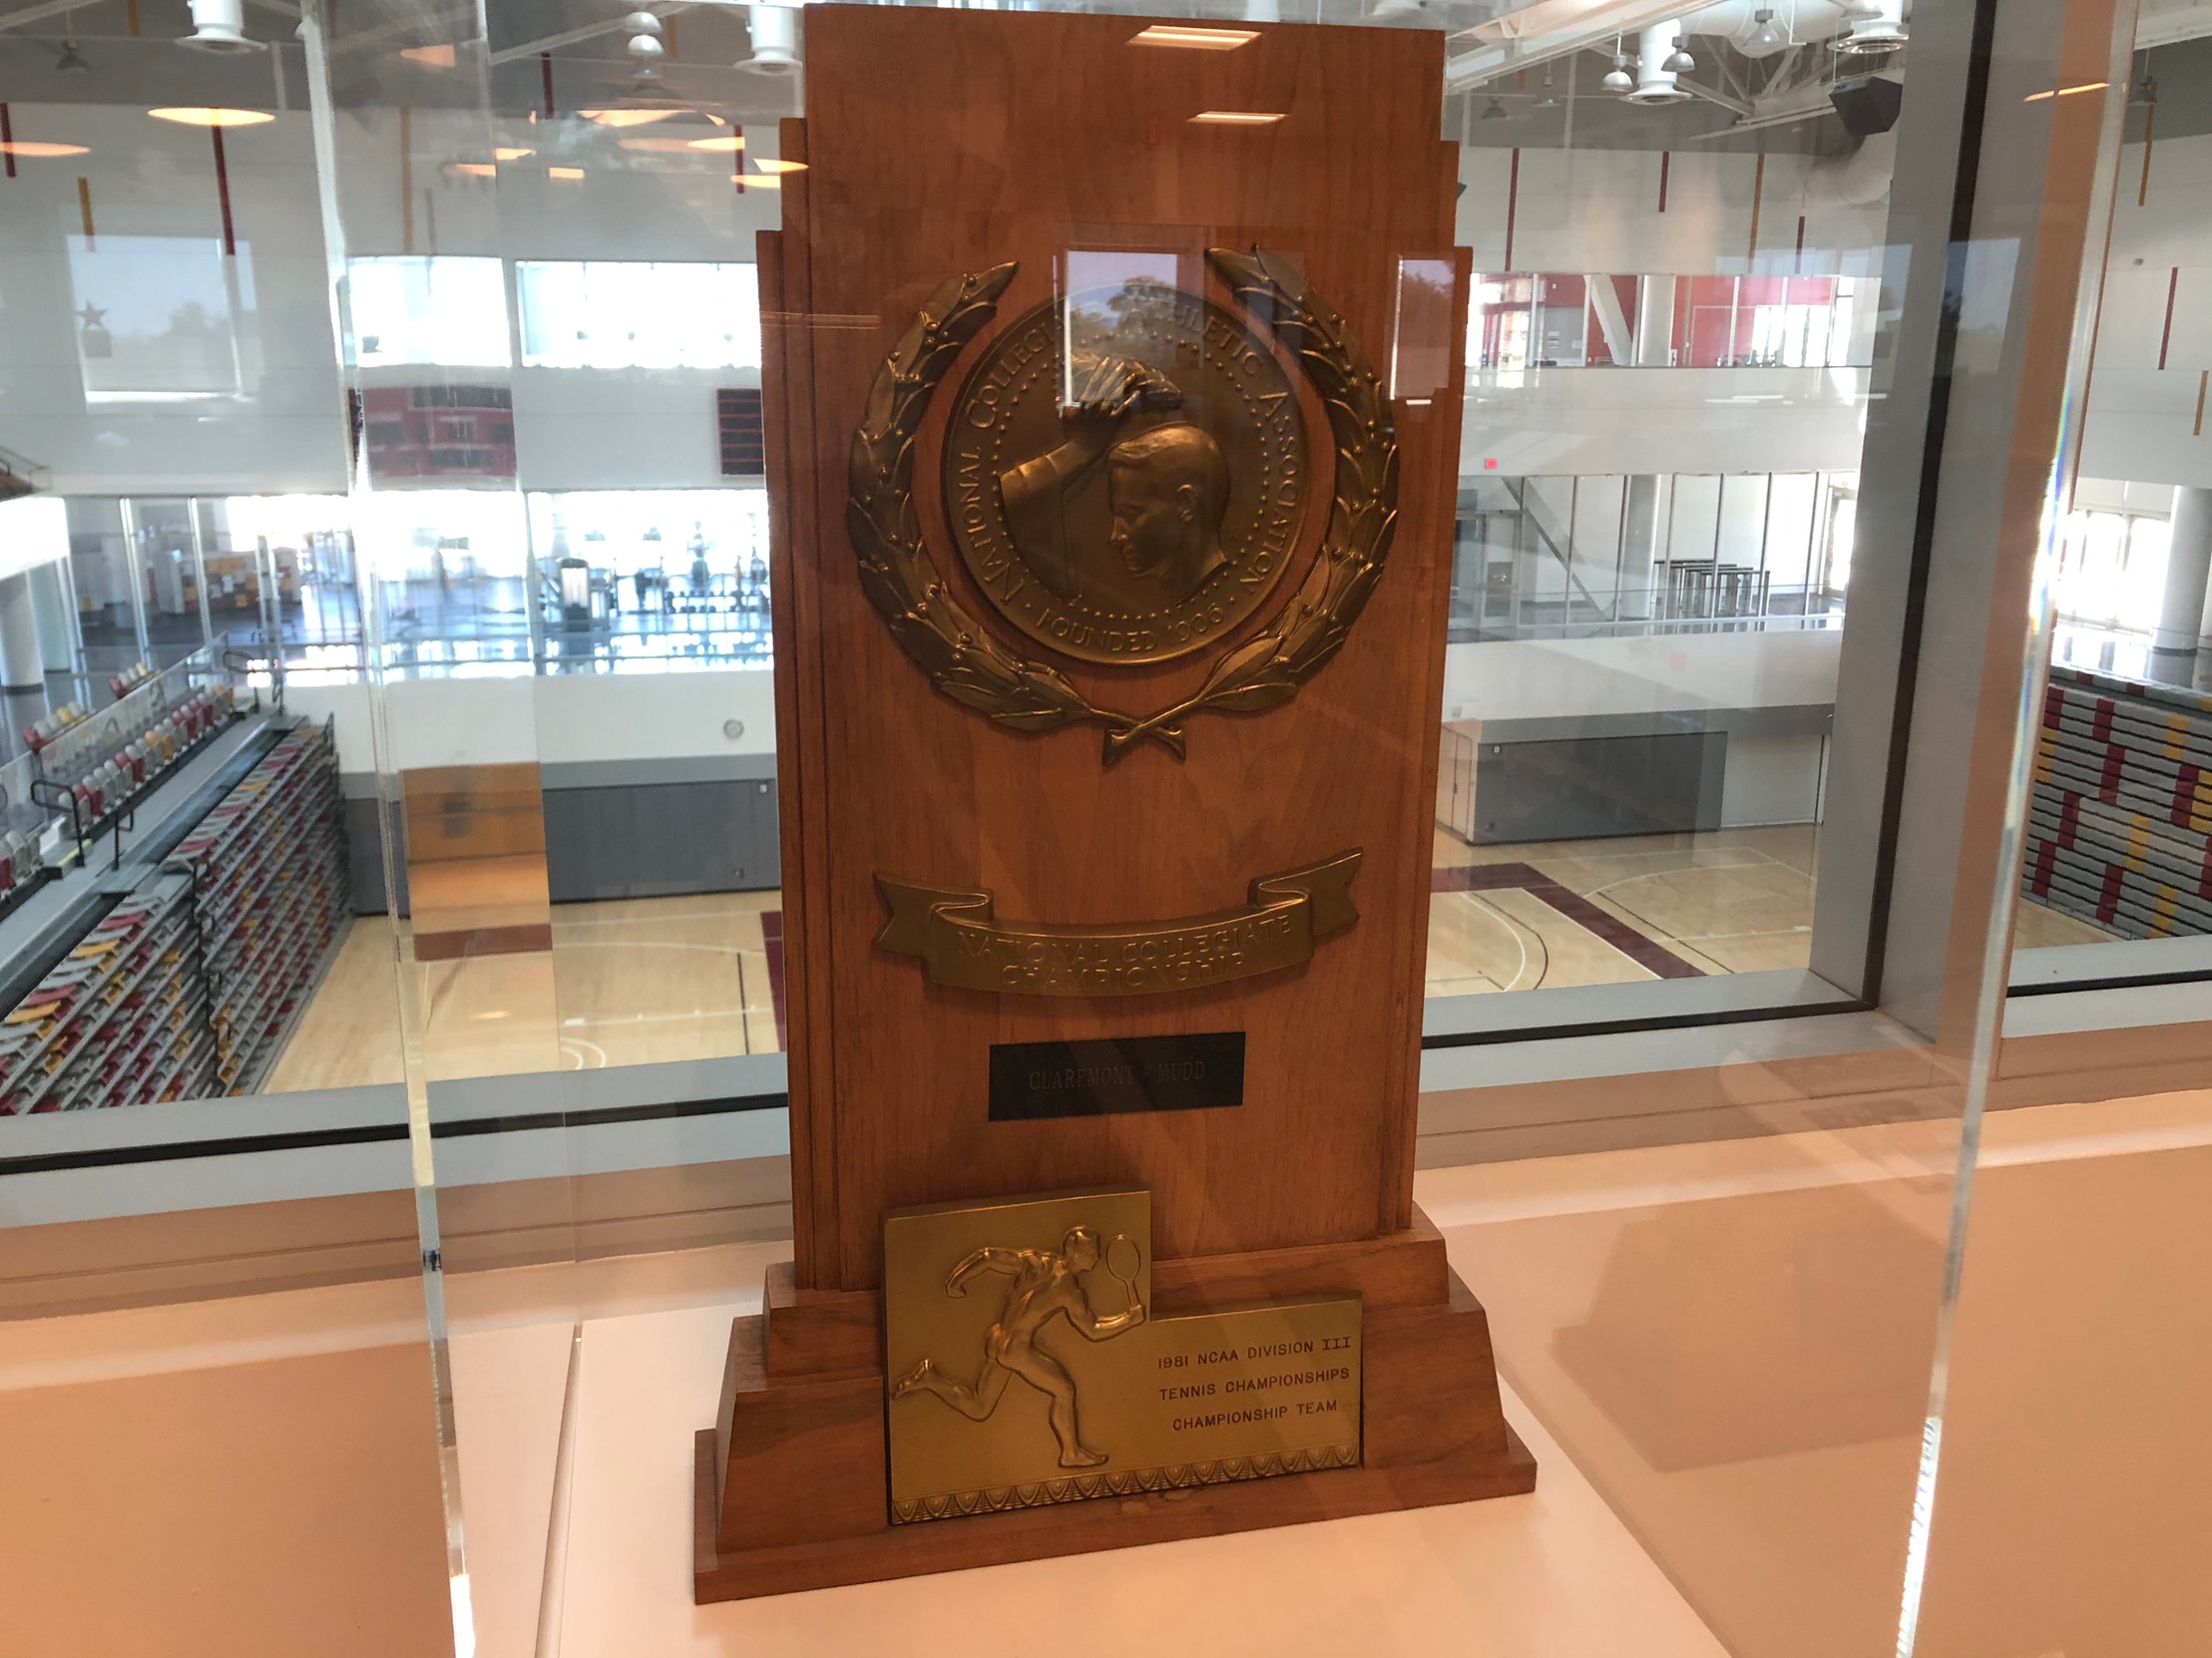 The national title trophy